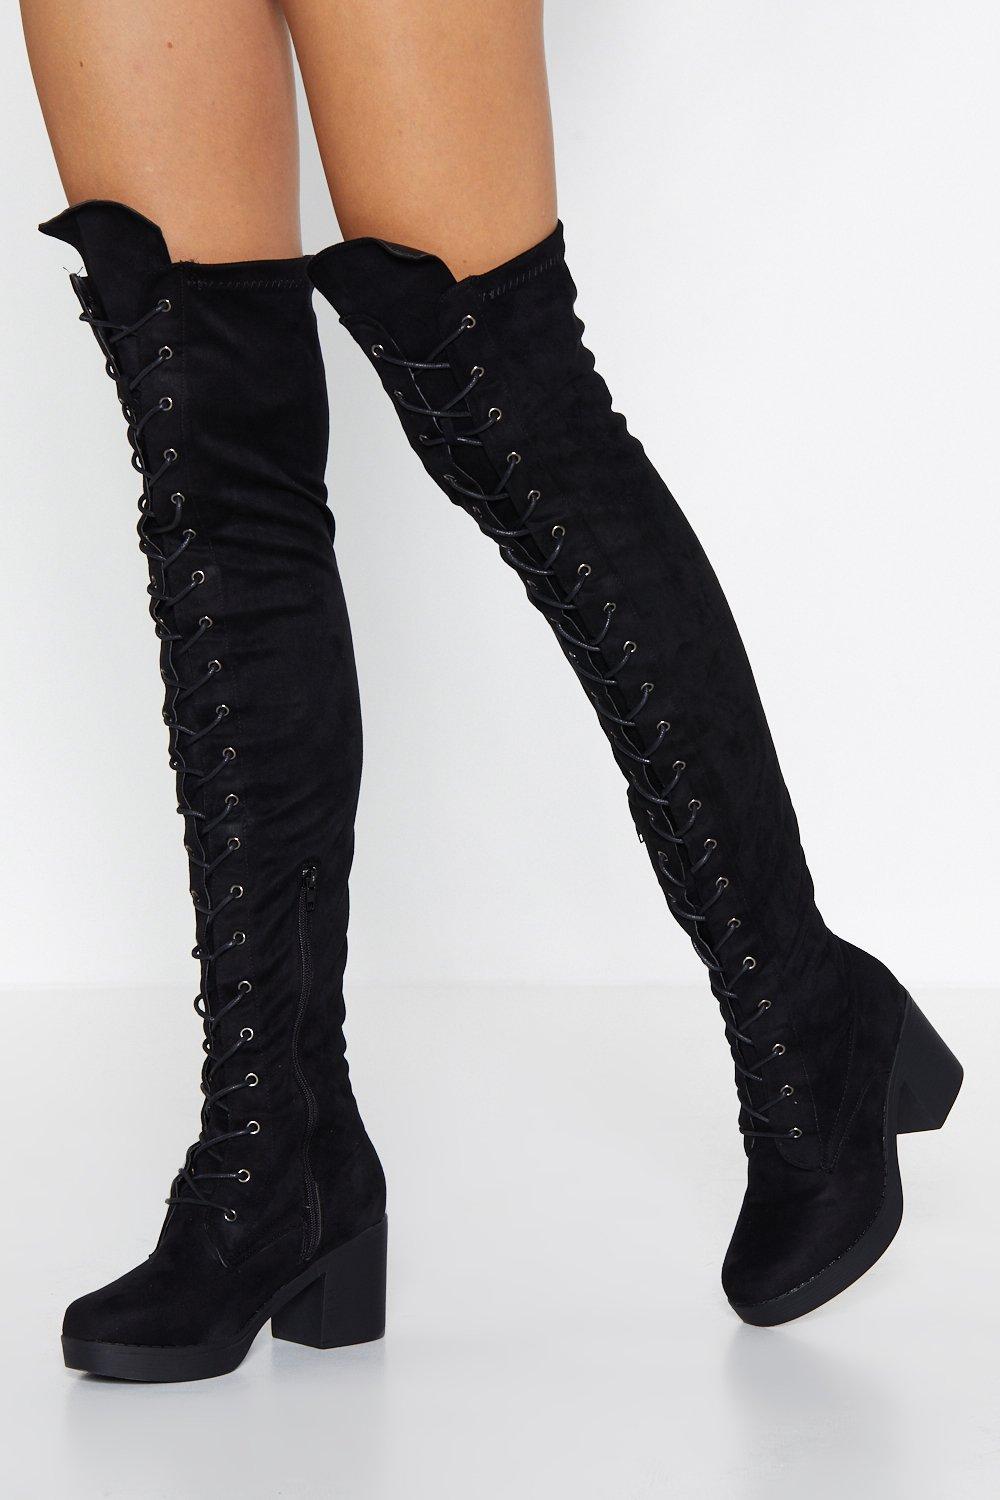 lace high knee boots